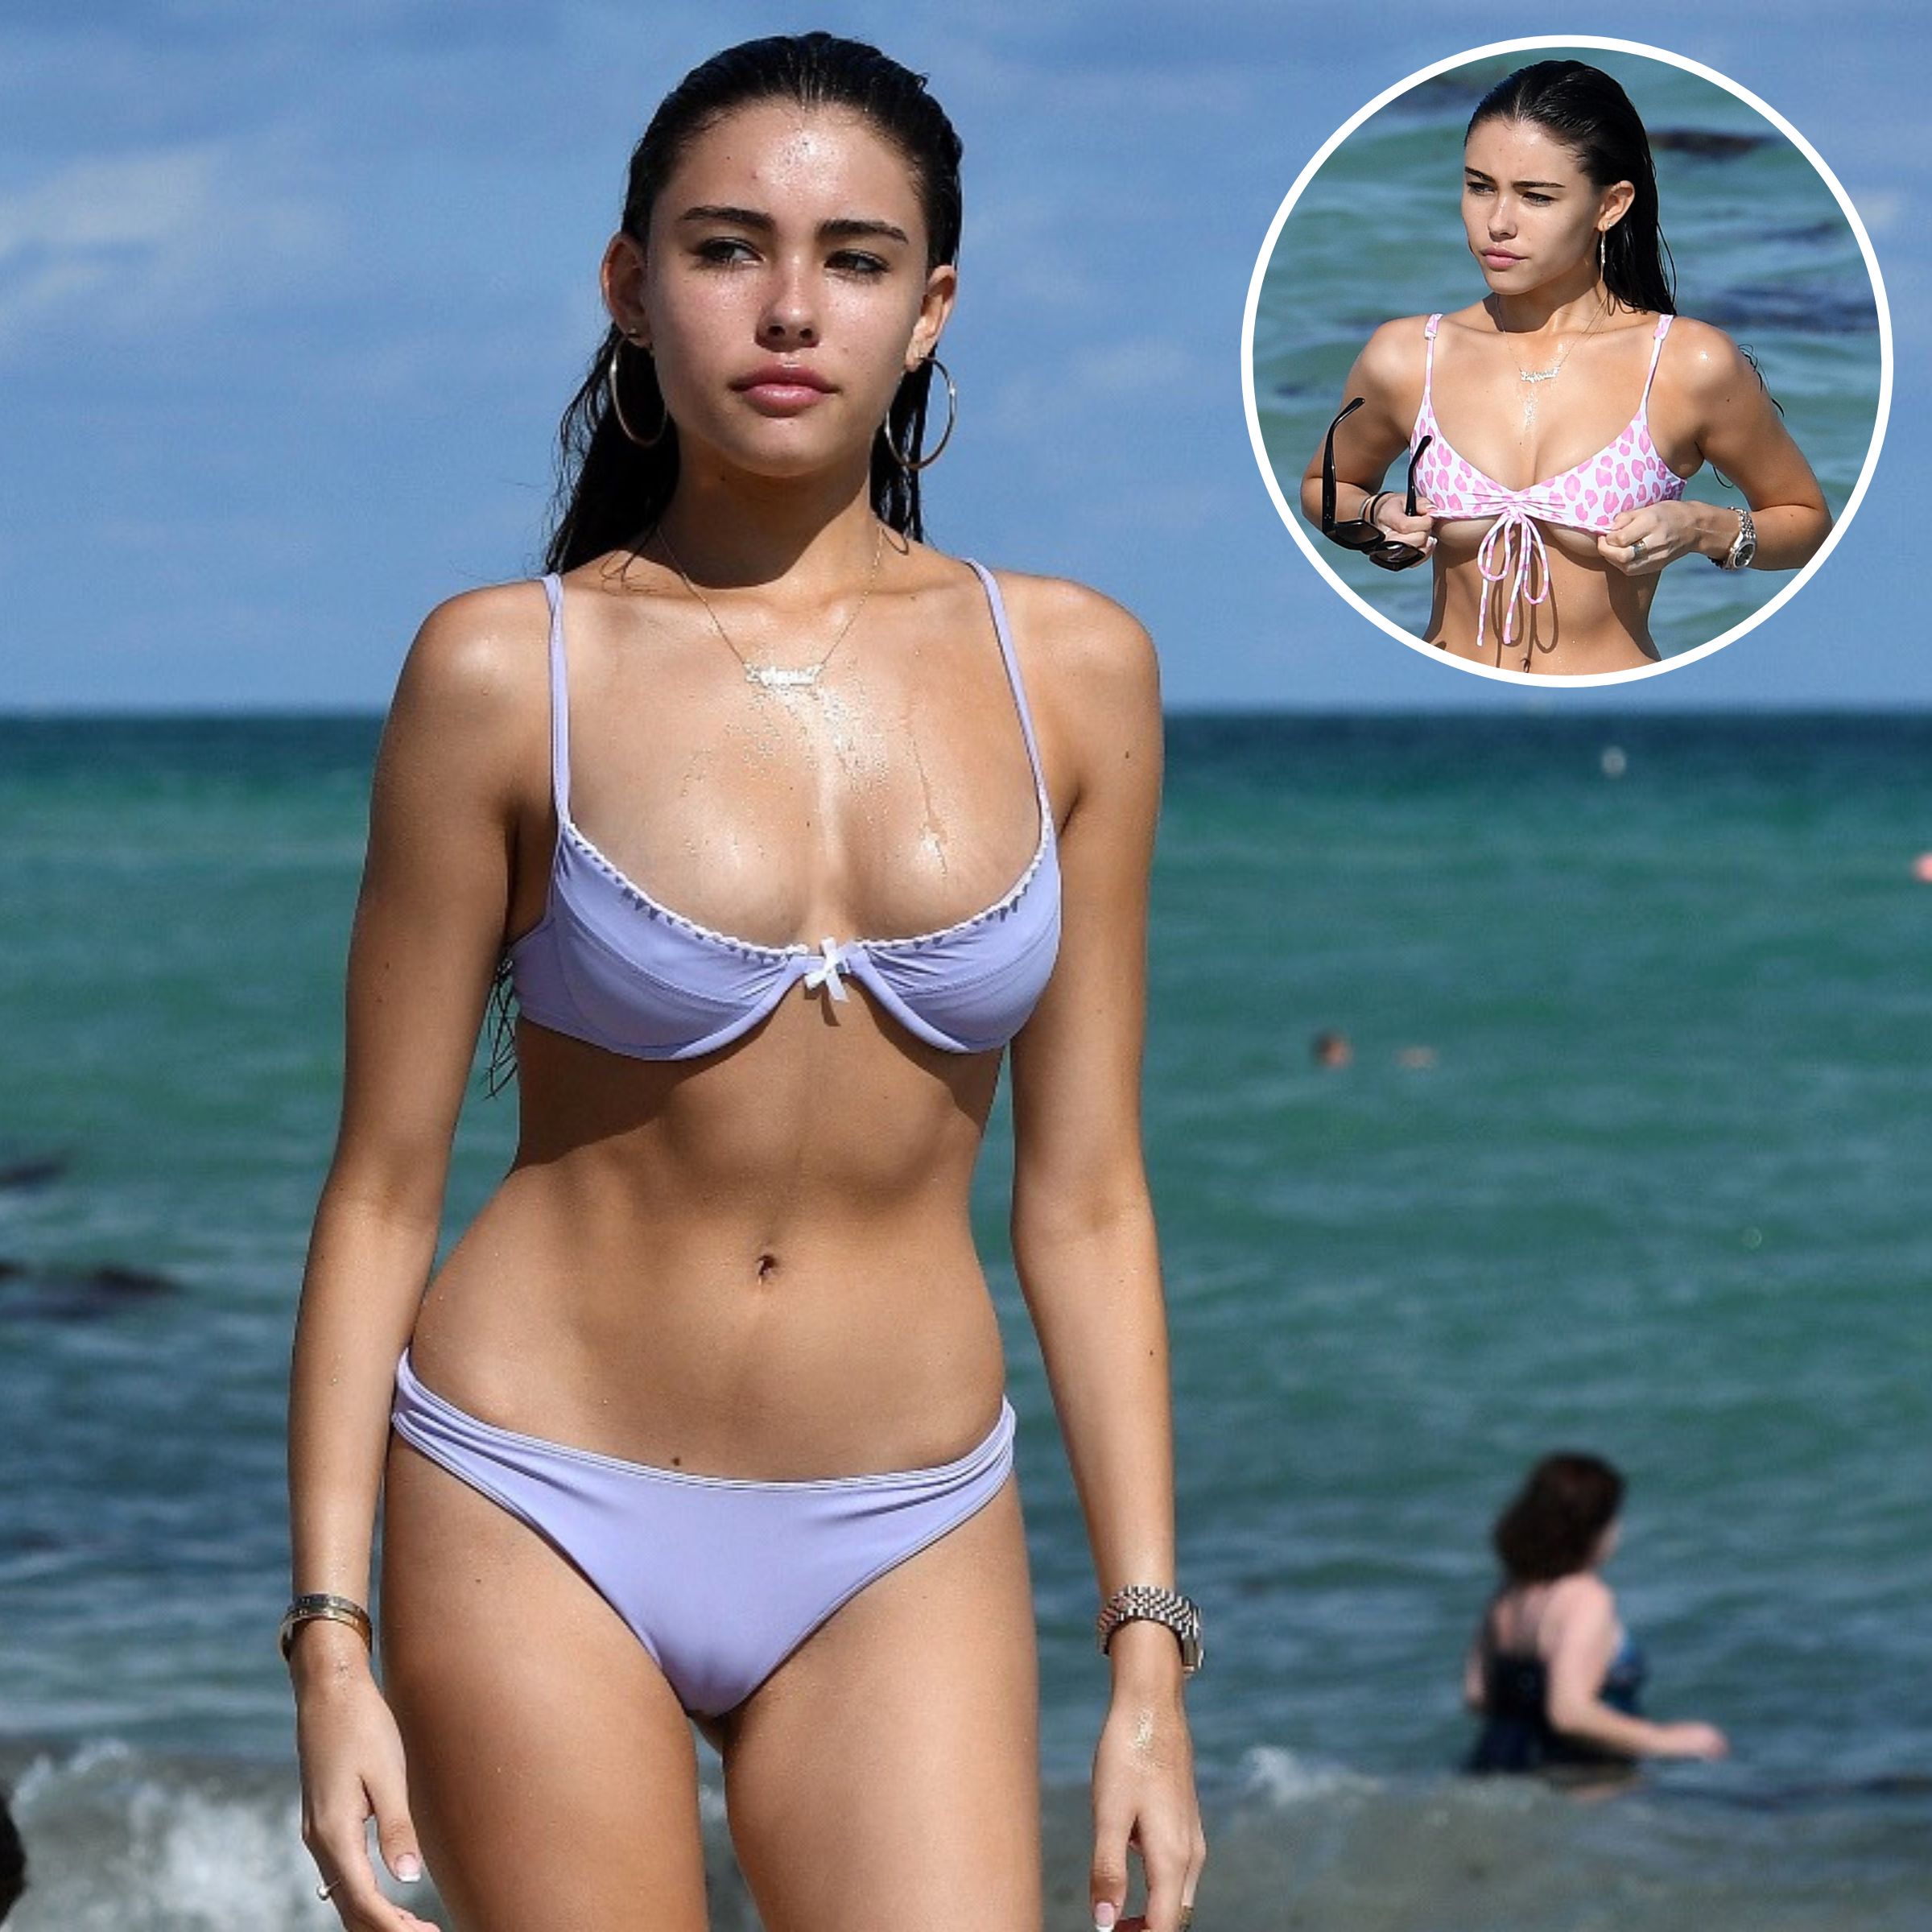 blessing aina share madison beer hot pics photos